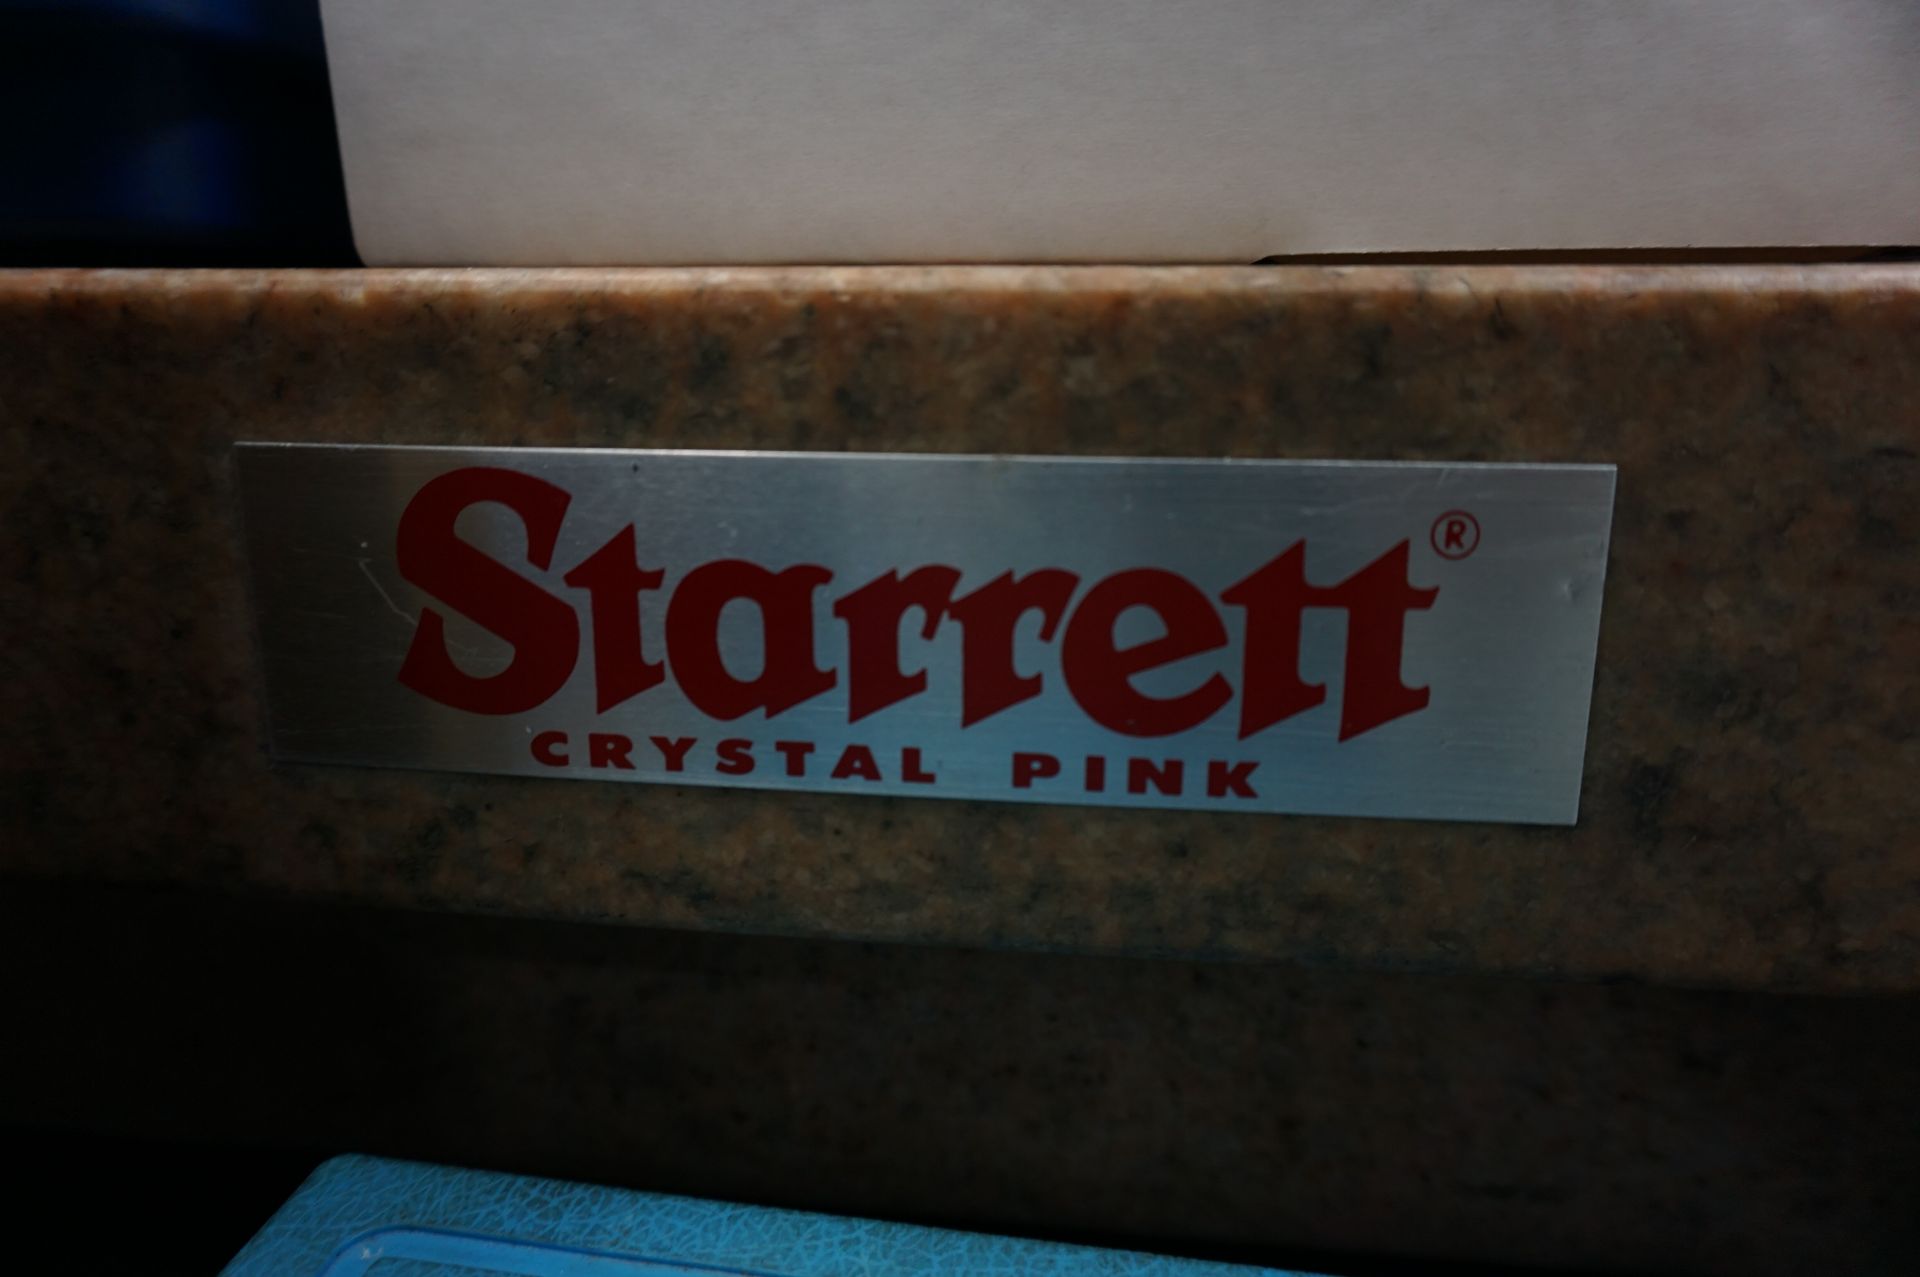 STARRETT CRYSTAL PINK GRANITE INSPECTION TABLE, 3' X 3' - Image 2 of 3